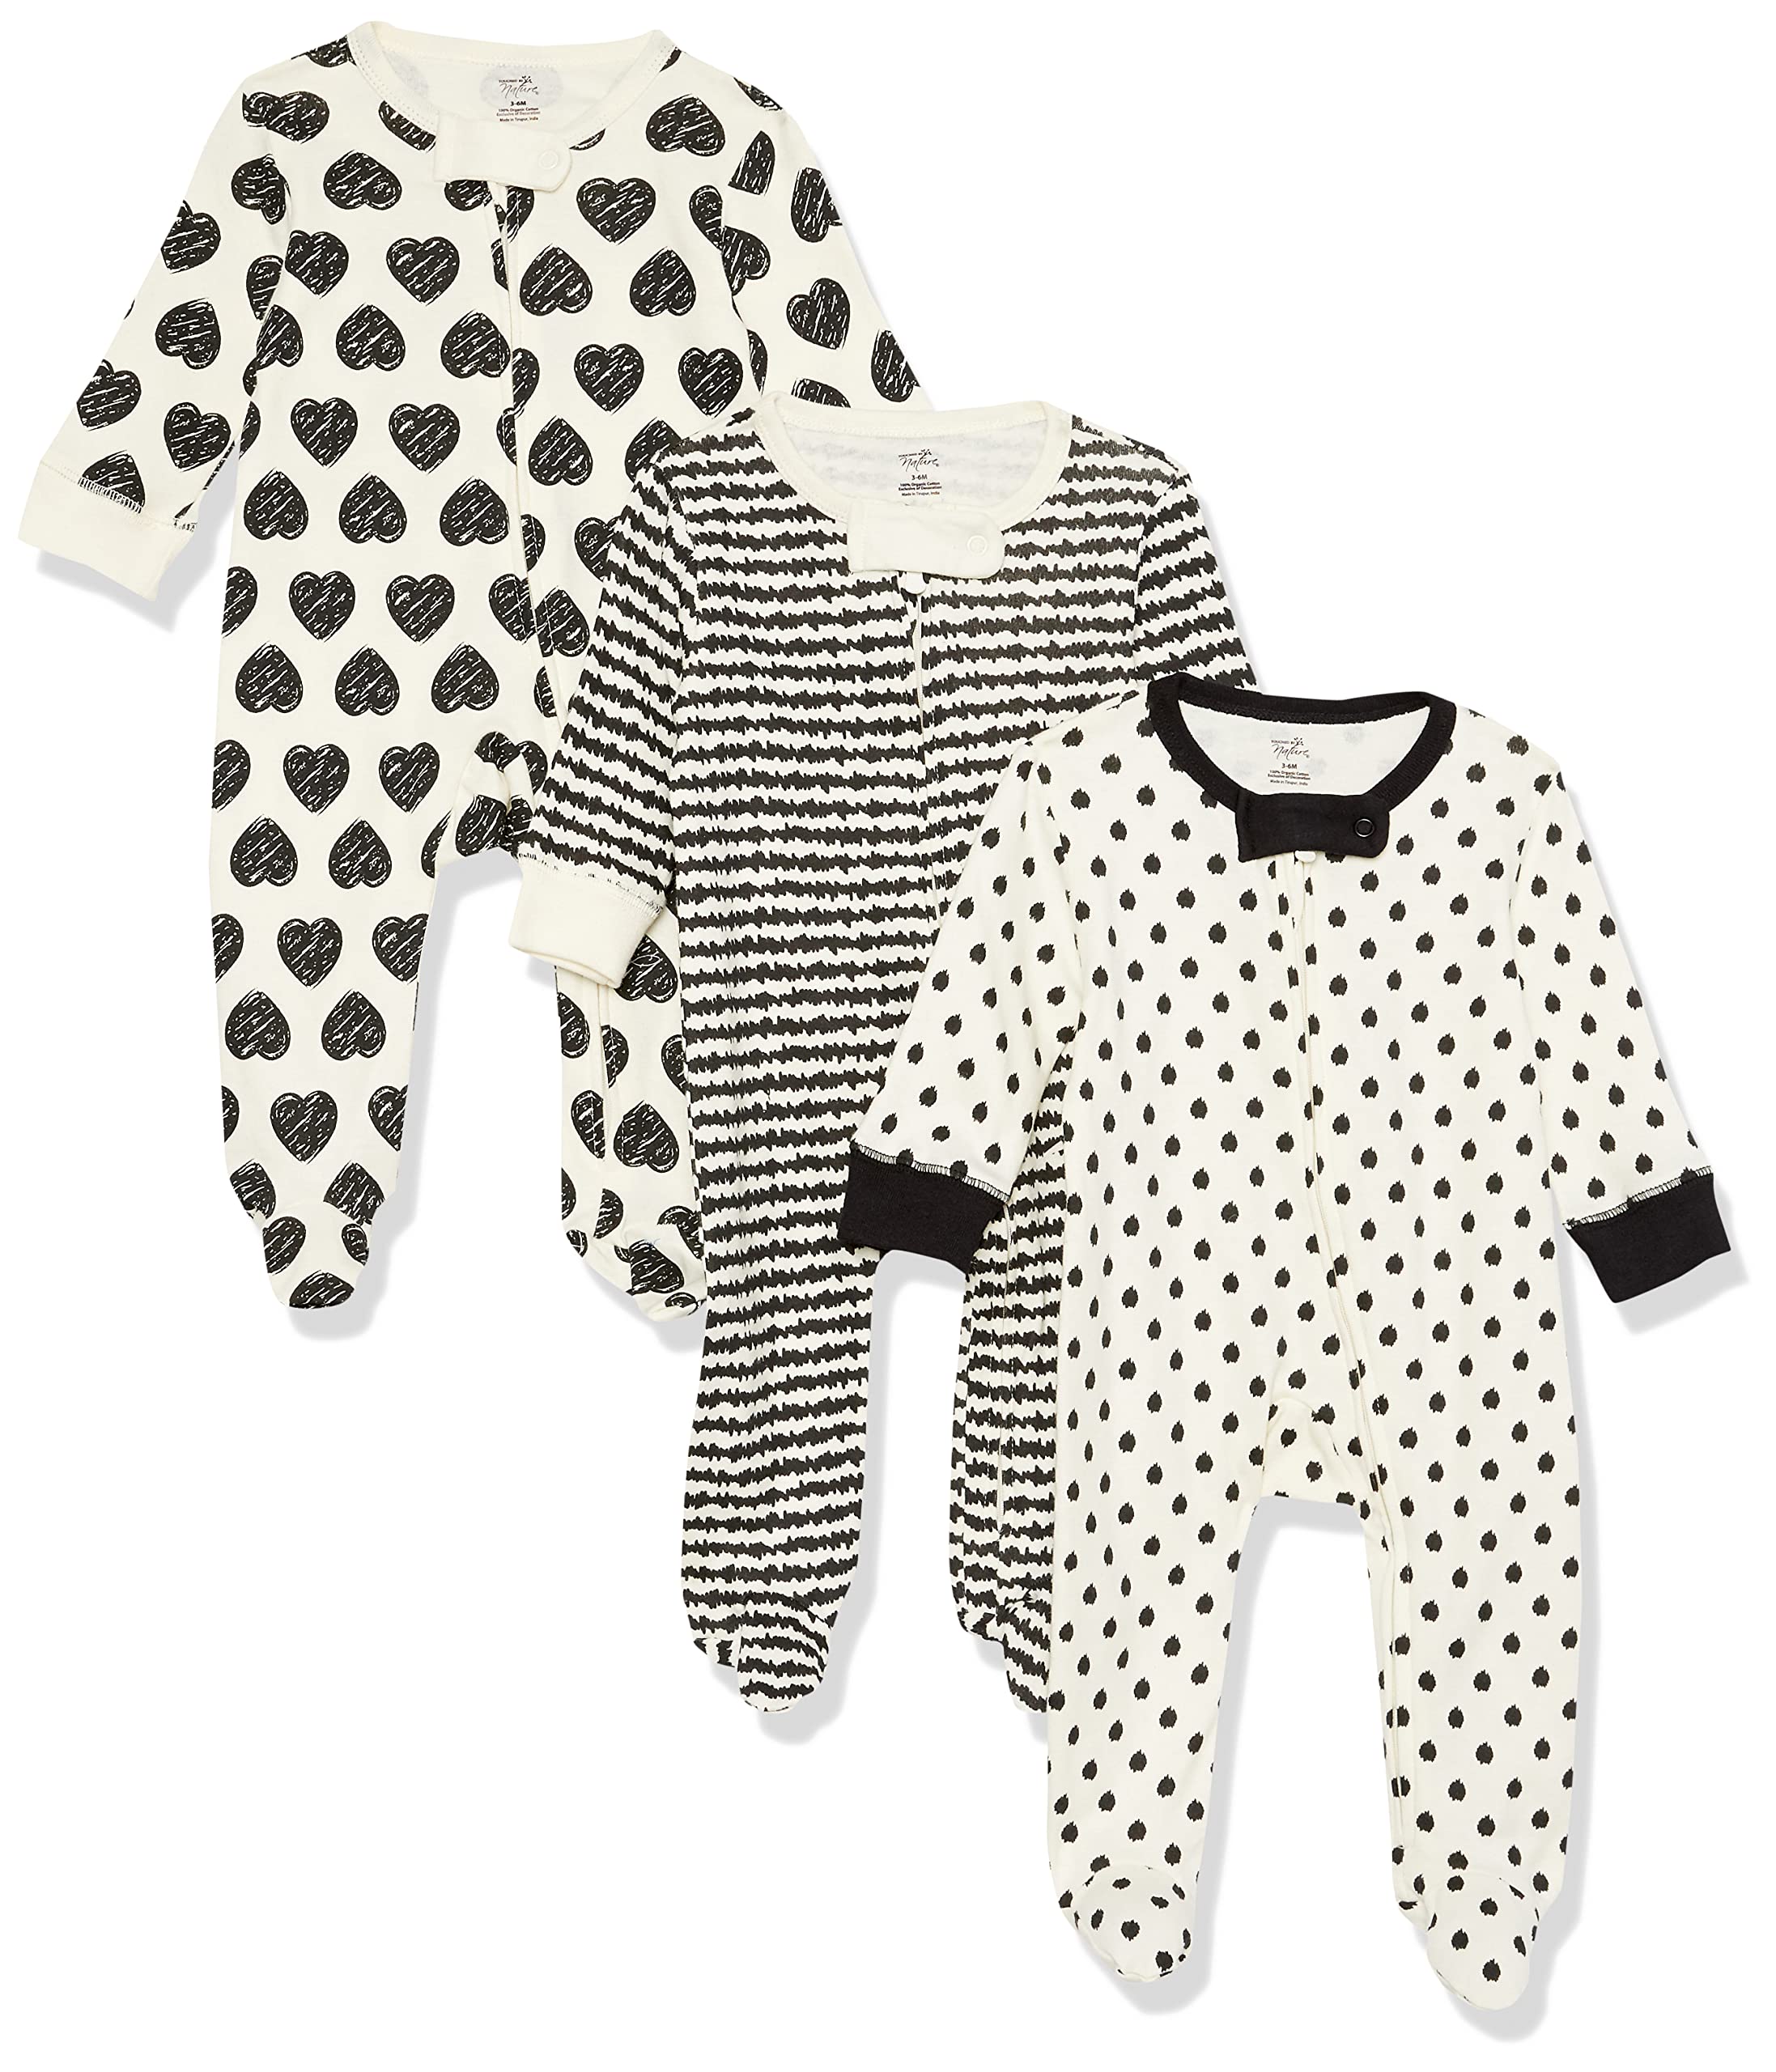 Touched by Nature Baby Organic Cotton Sleep and Play